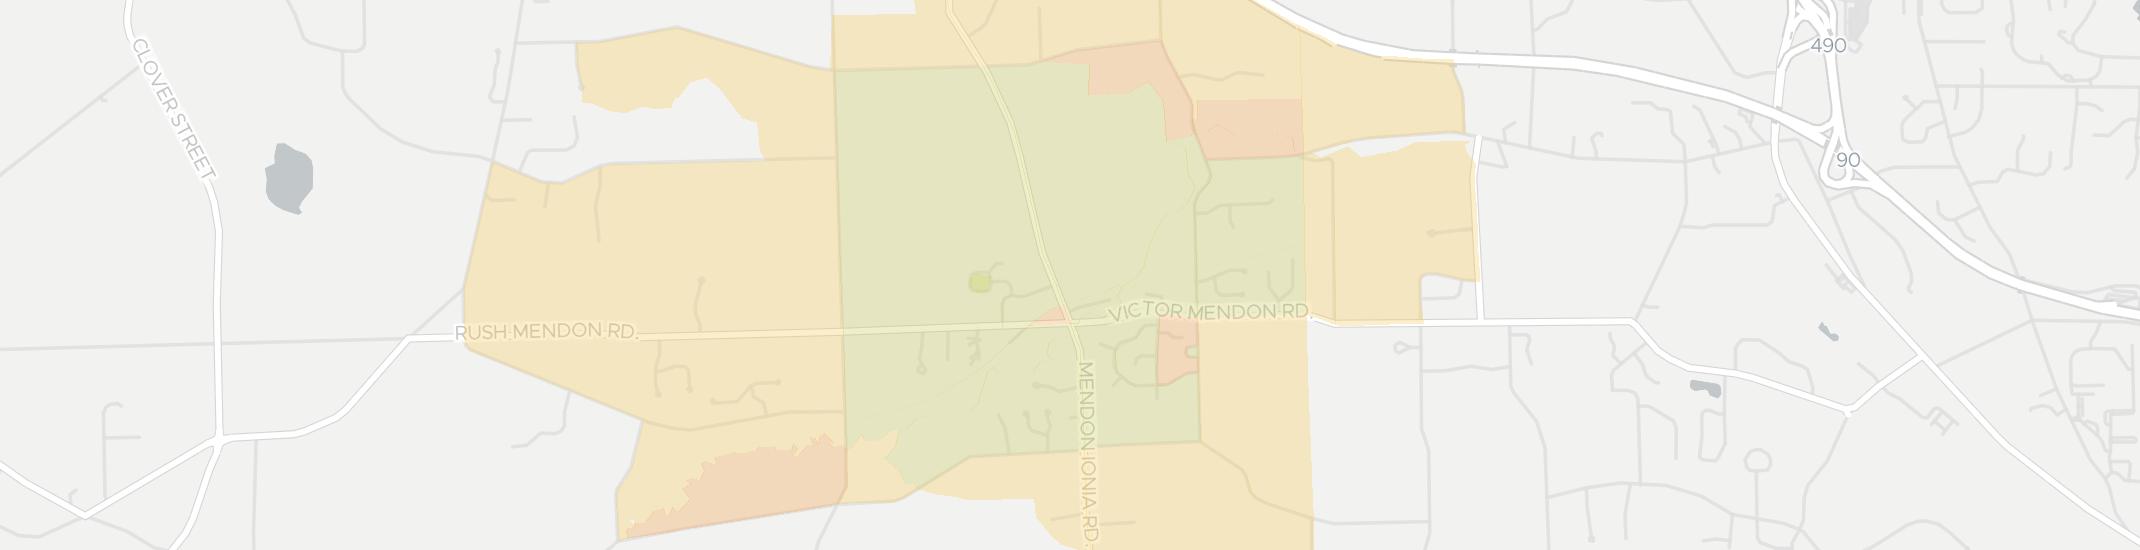 Mendon Internet Competition Map. Click for interactive map.